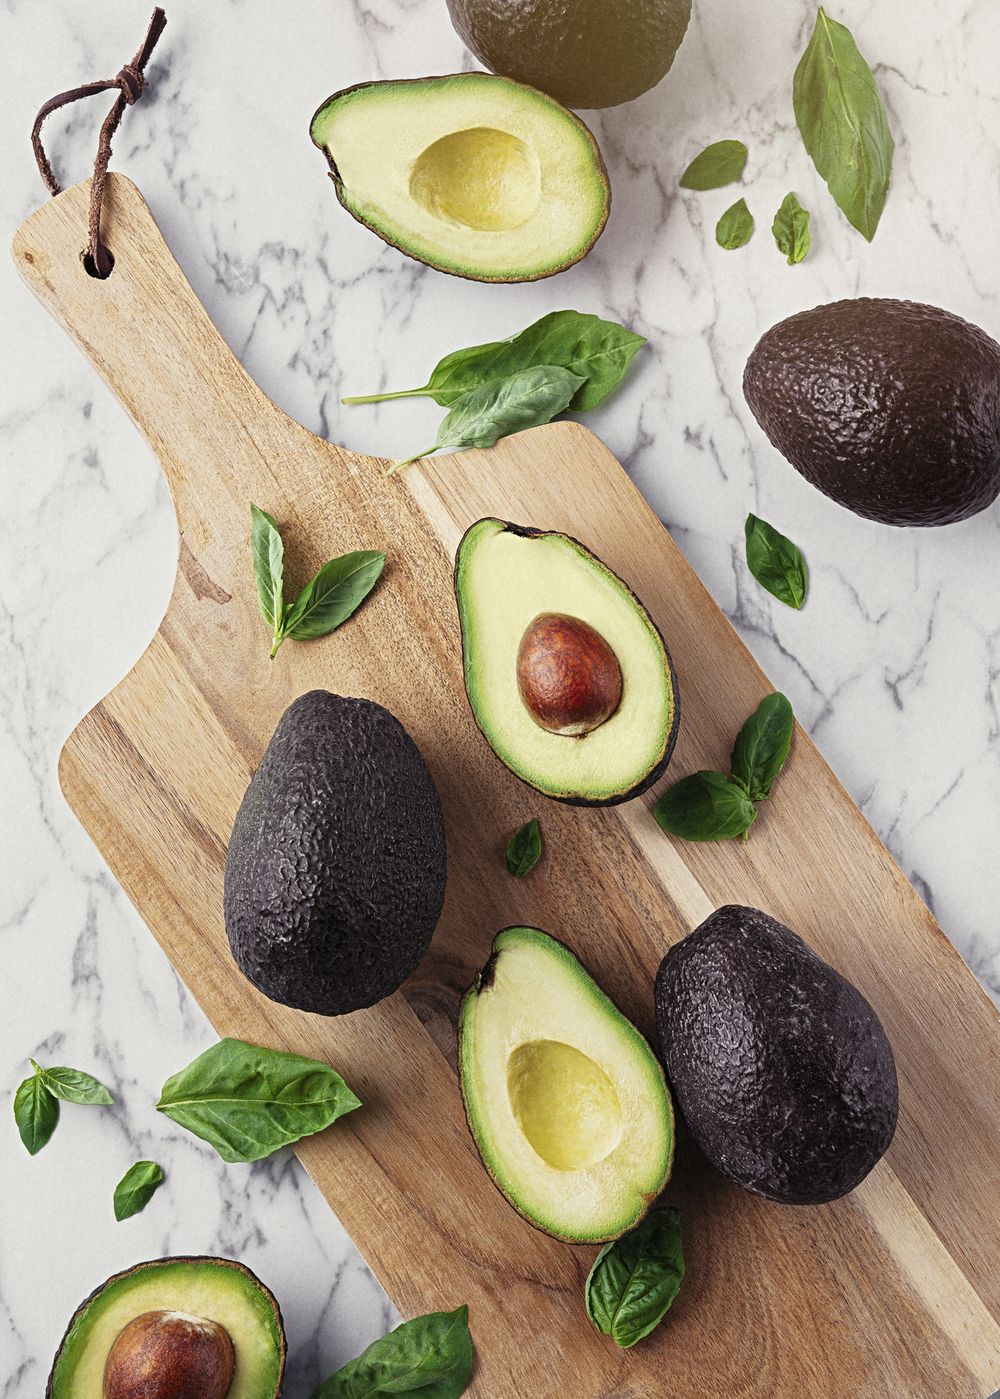 How to tell avocado is ripe